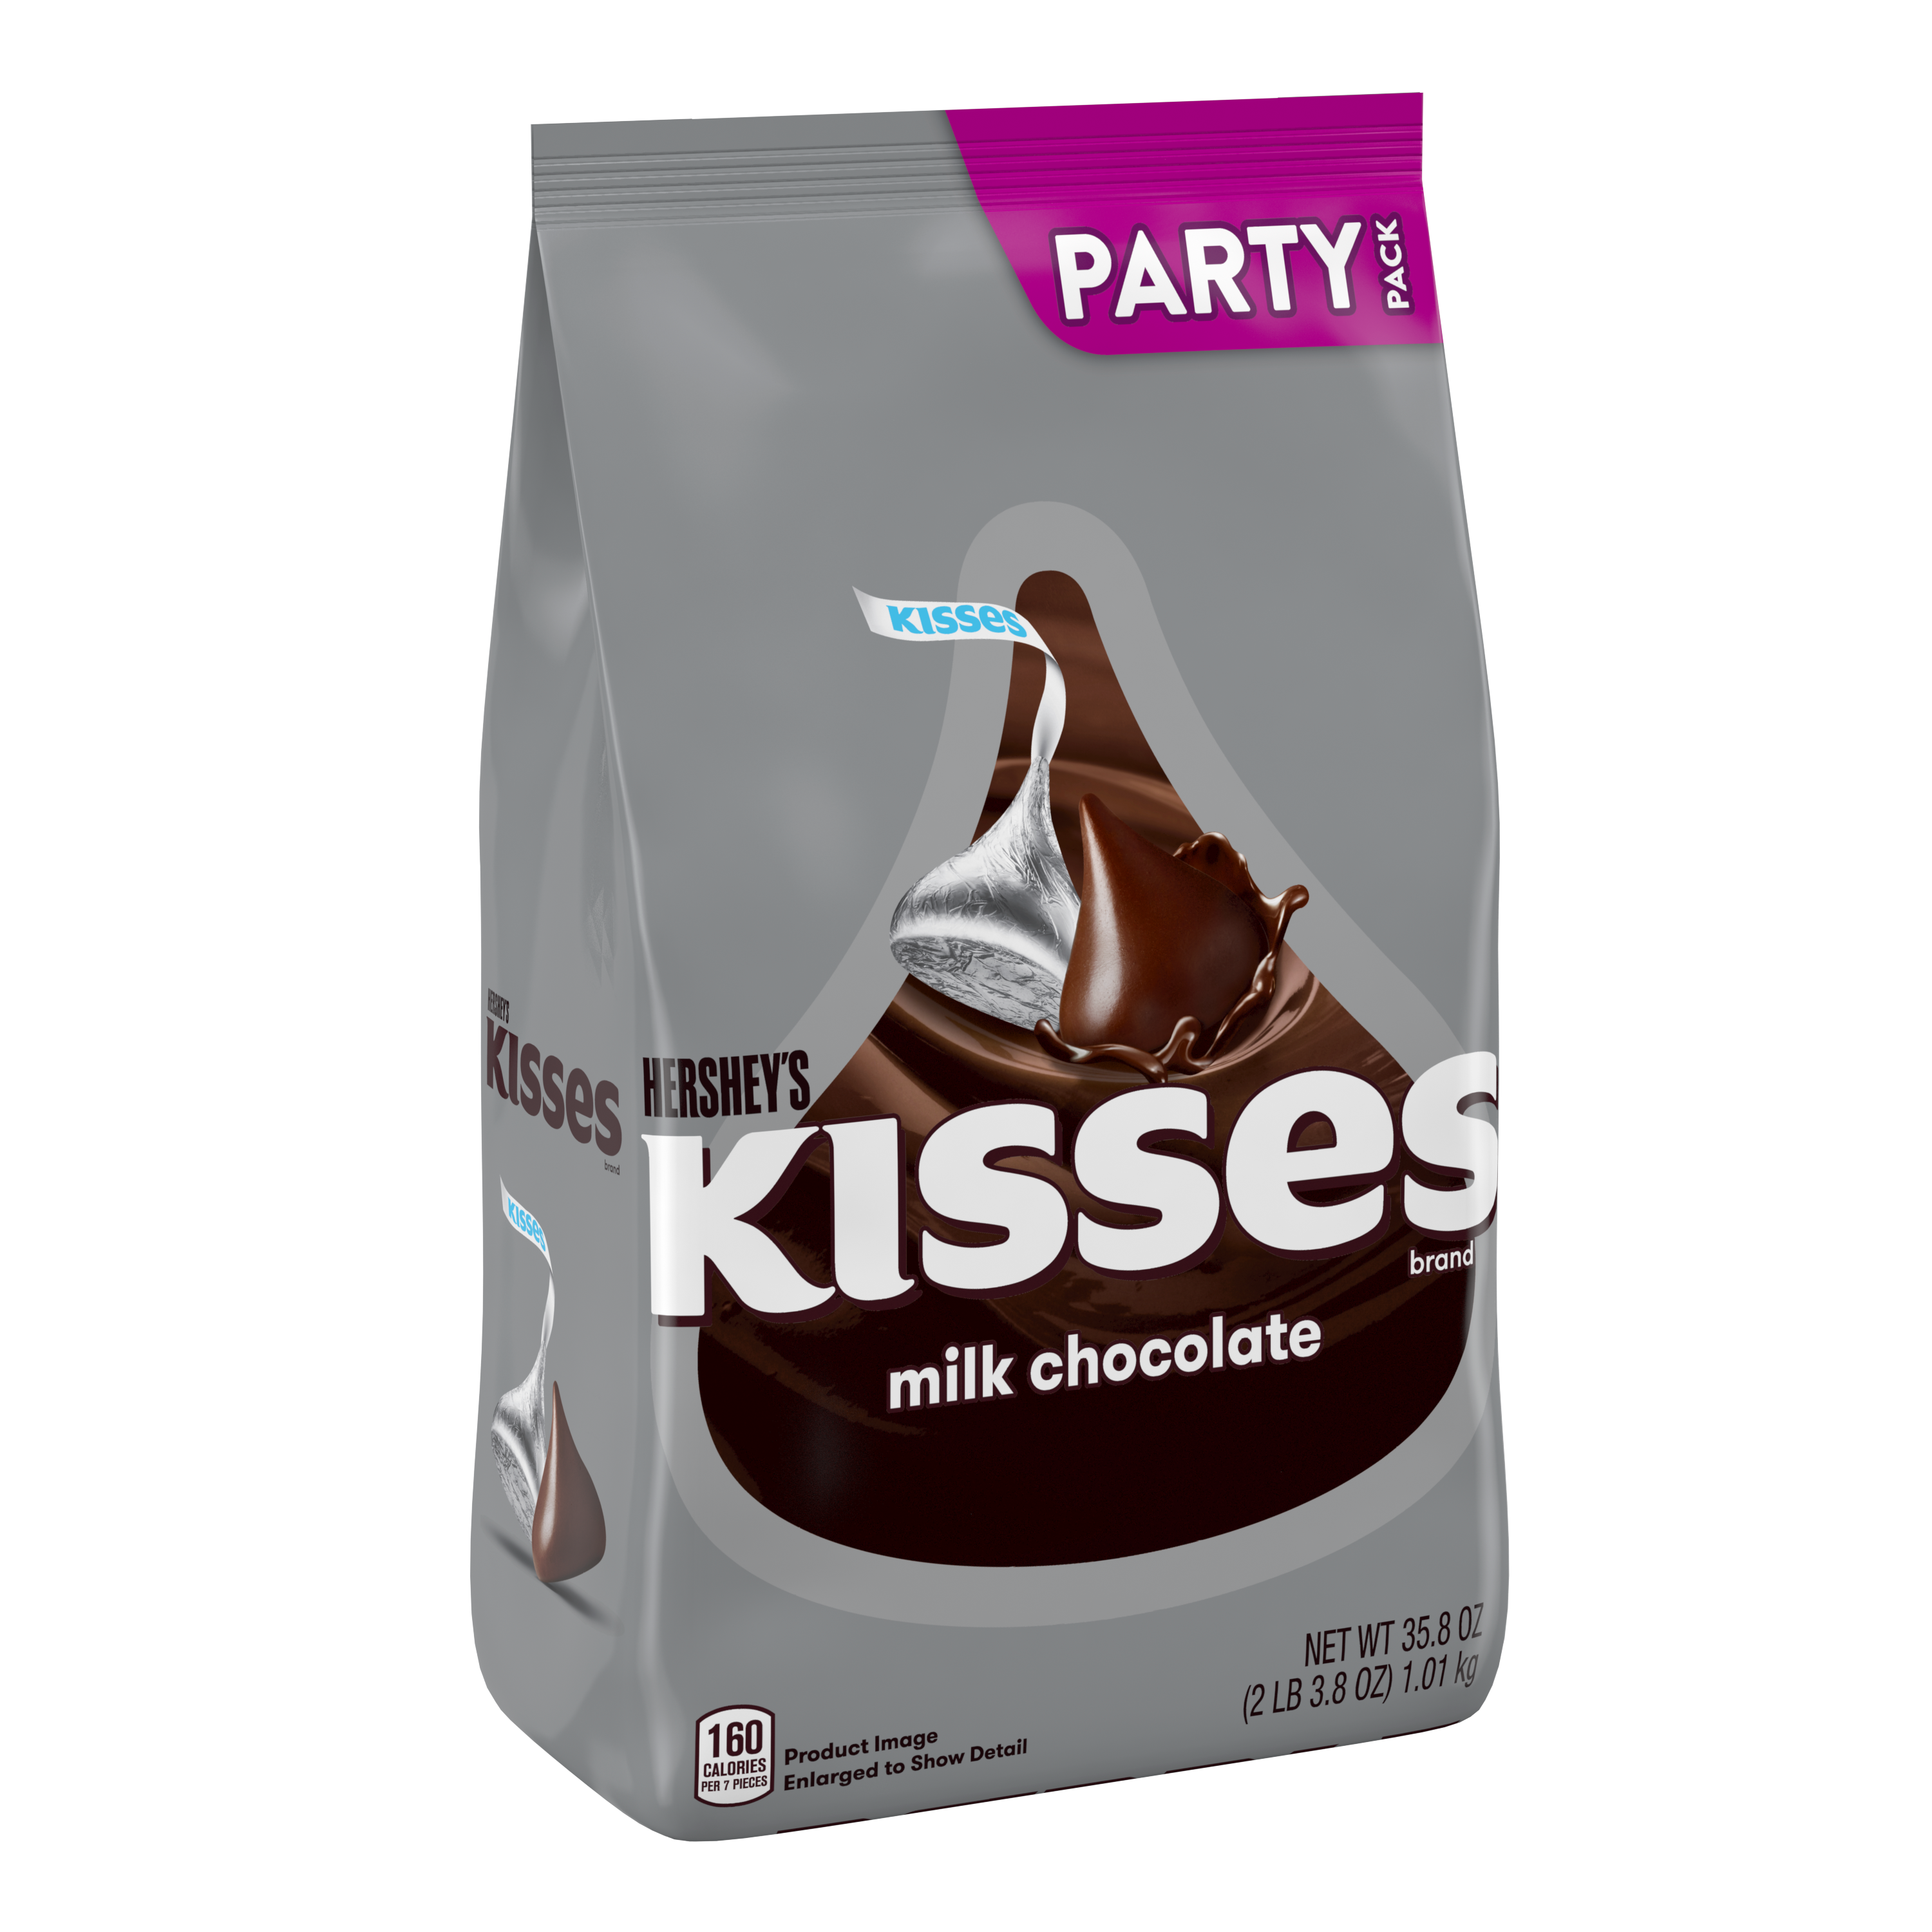 HERSHEY'S KISSES Milk Chocolate Candy, 35.8 oz pack - Left Side of Package